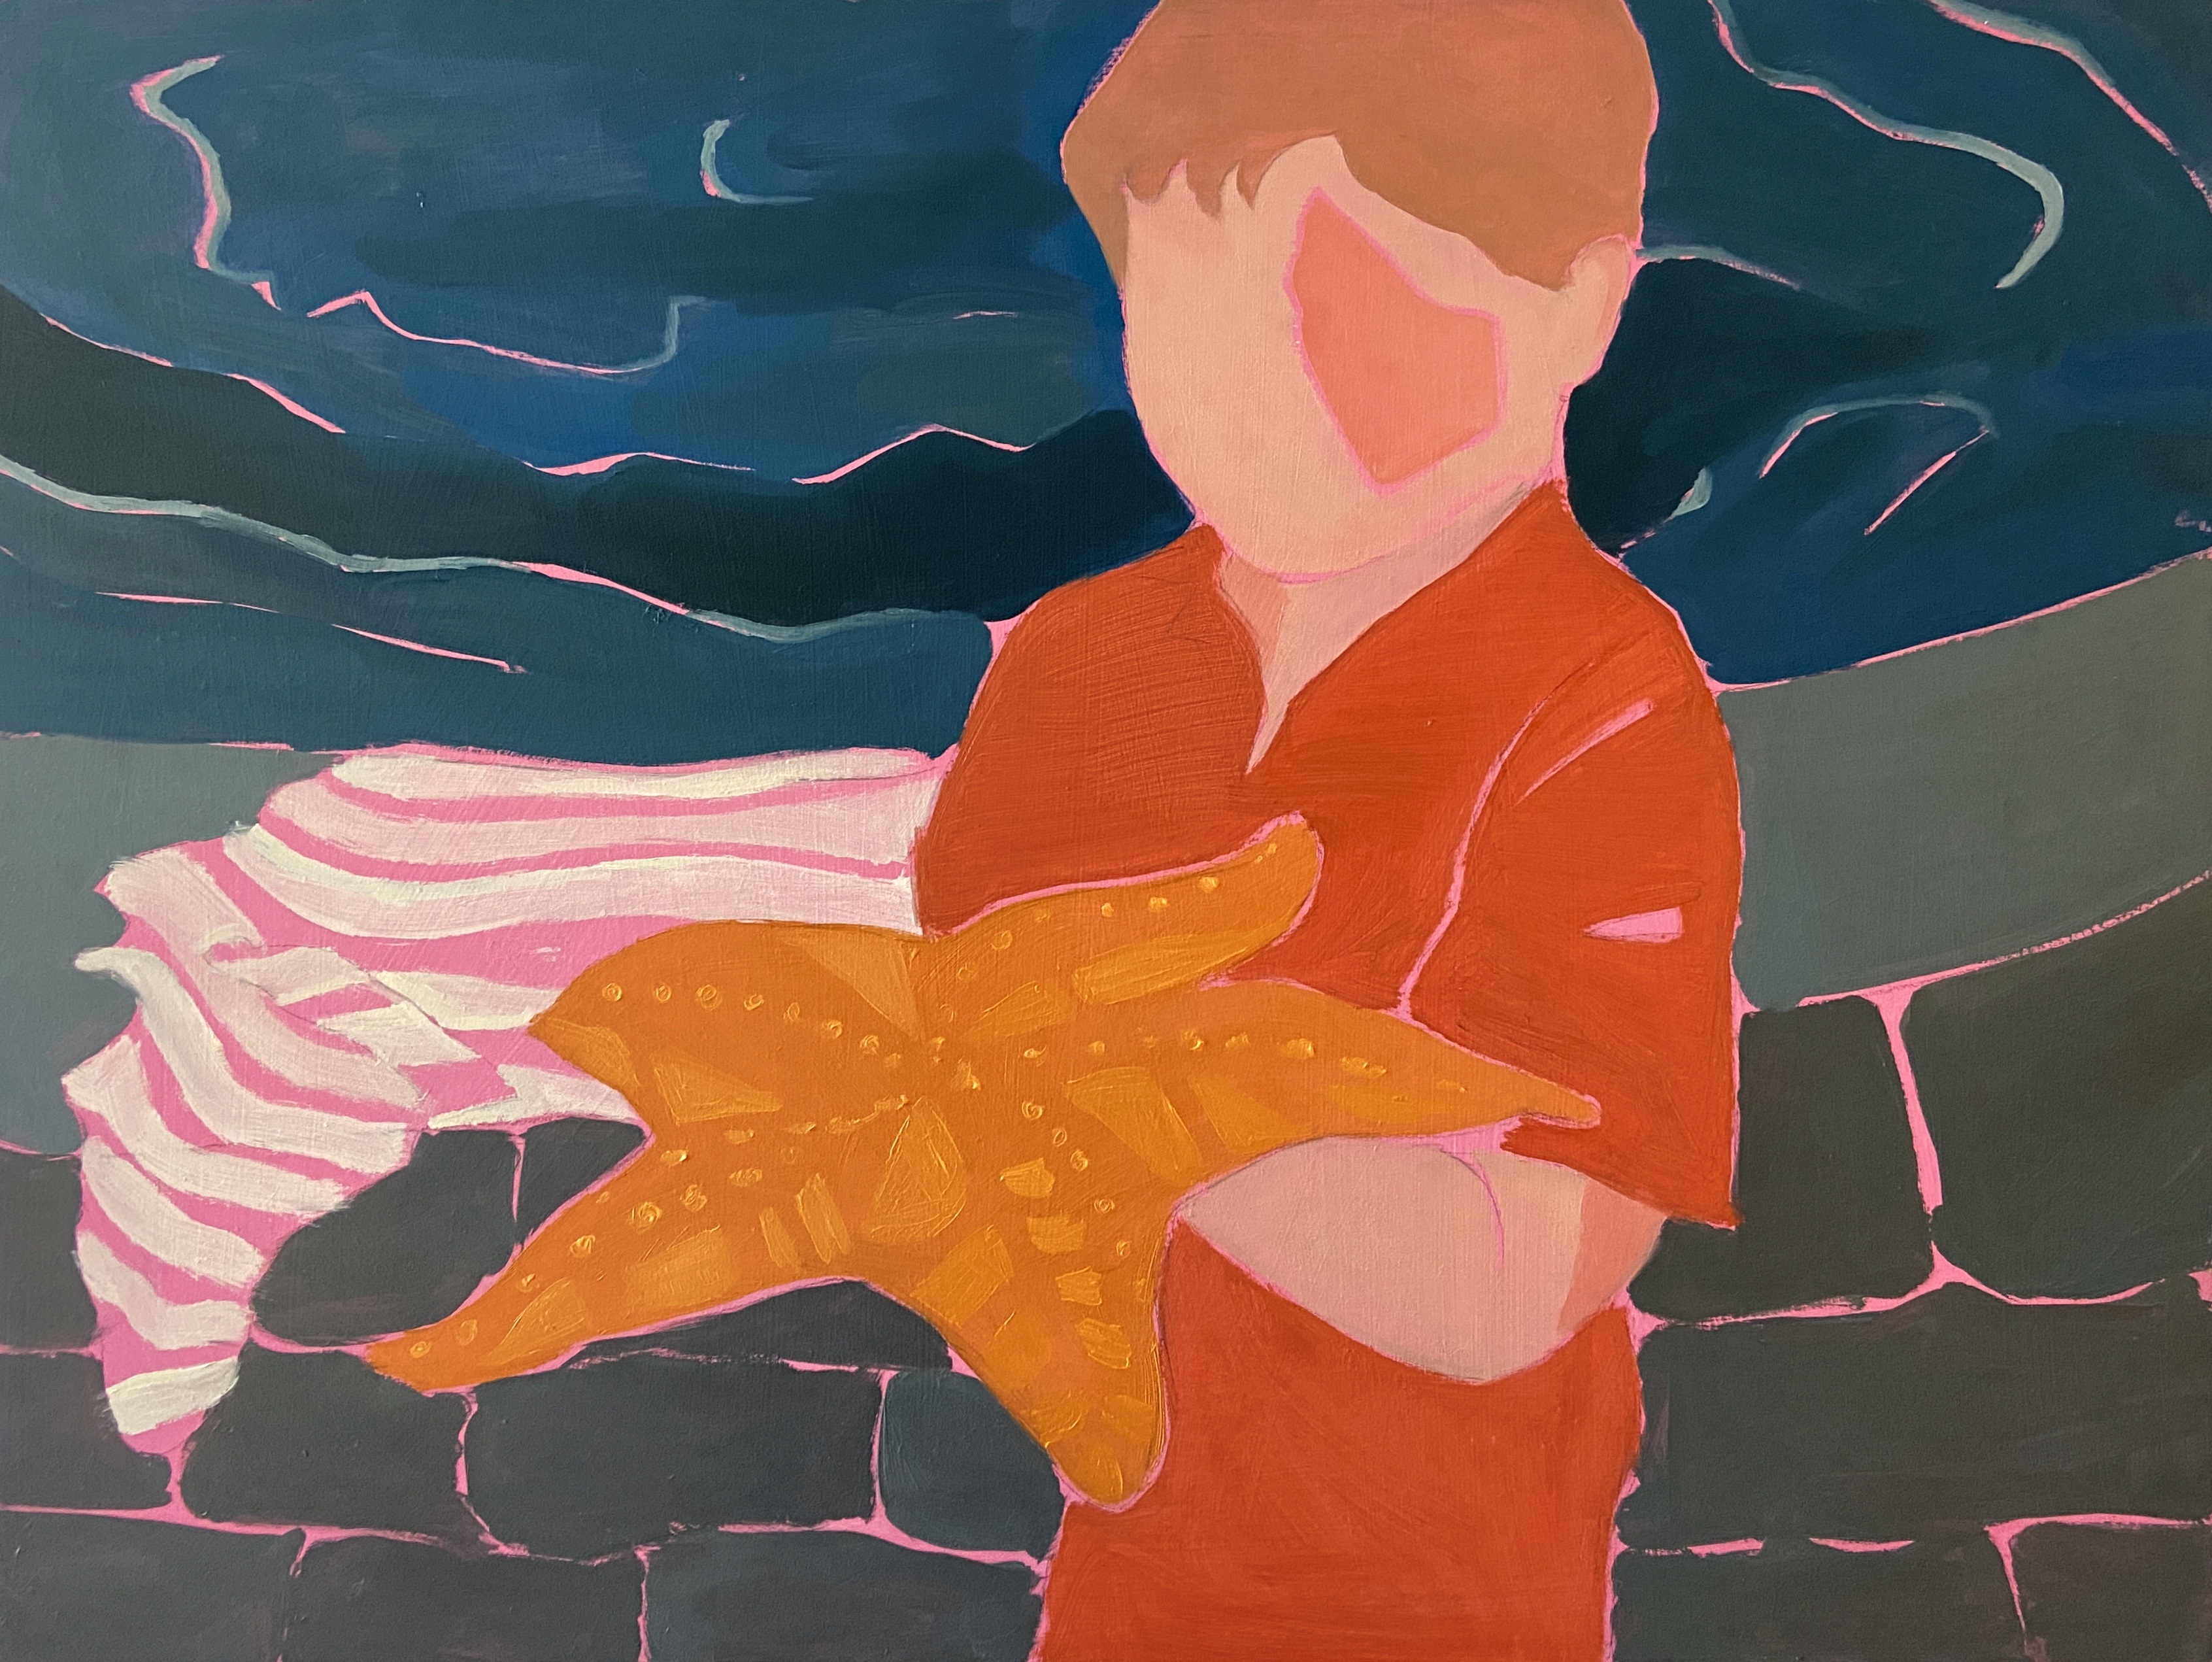 Painting of a child holding a large starfish